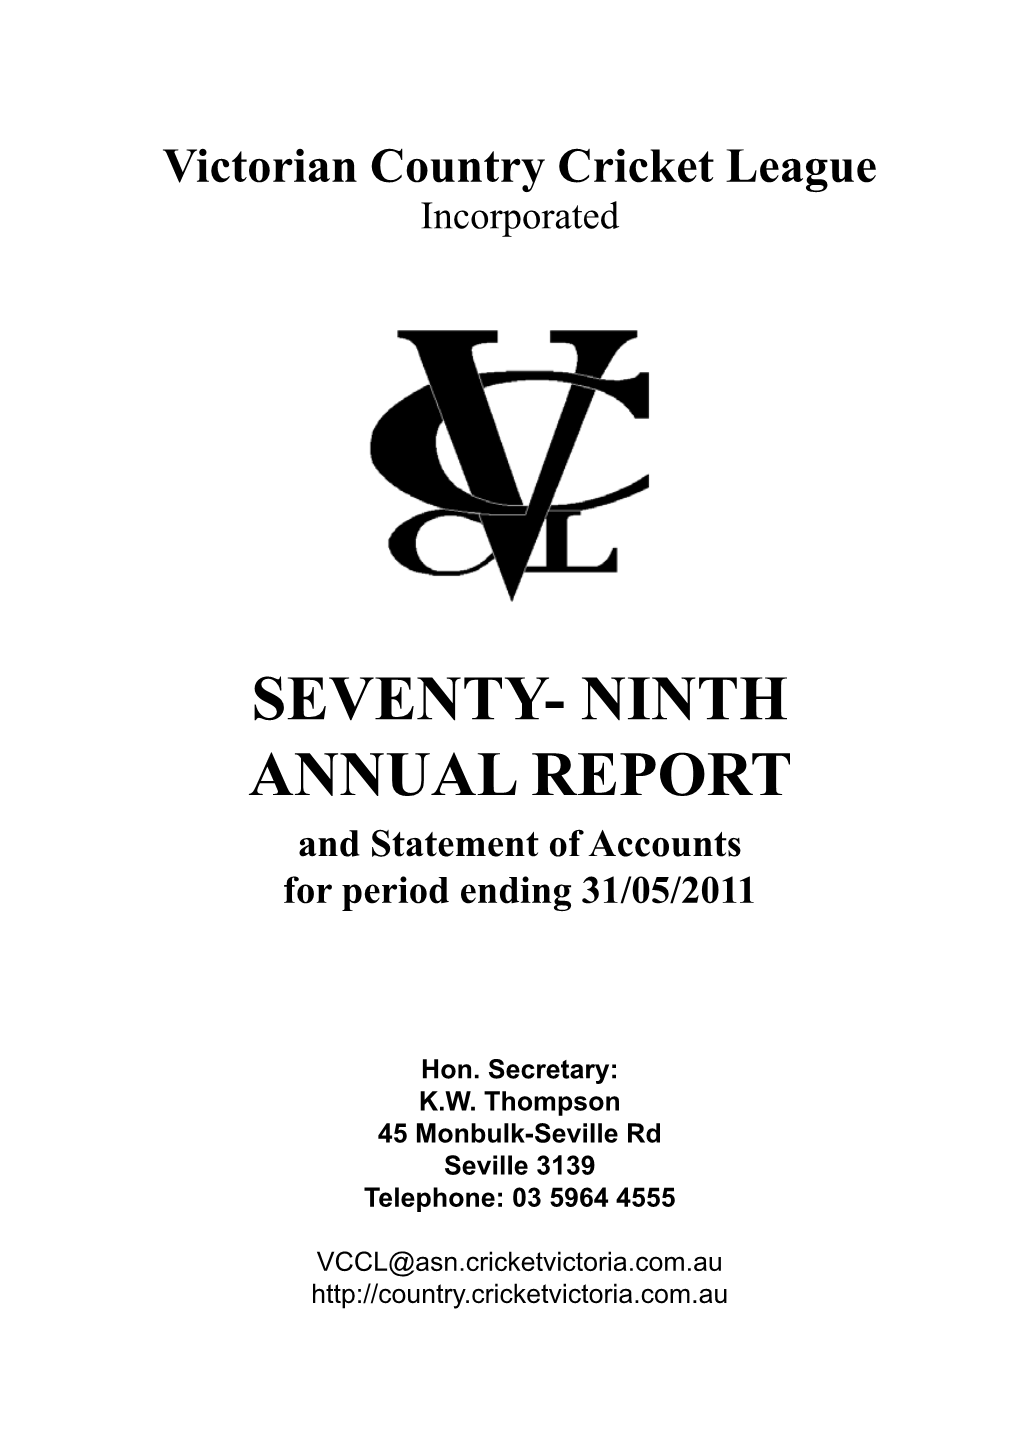 SEVENTY- NINTH ANNUAL REPORT and Statement of Accounts for Period Ending 31/05/2011